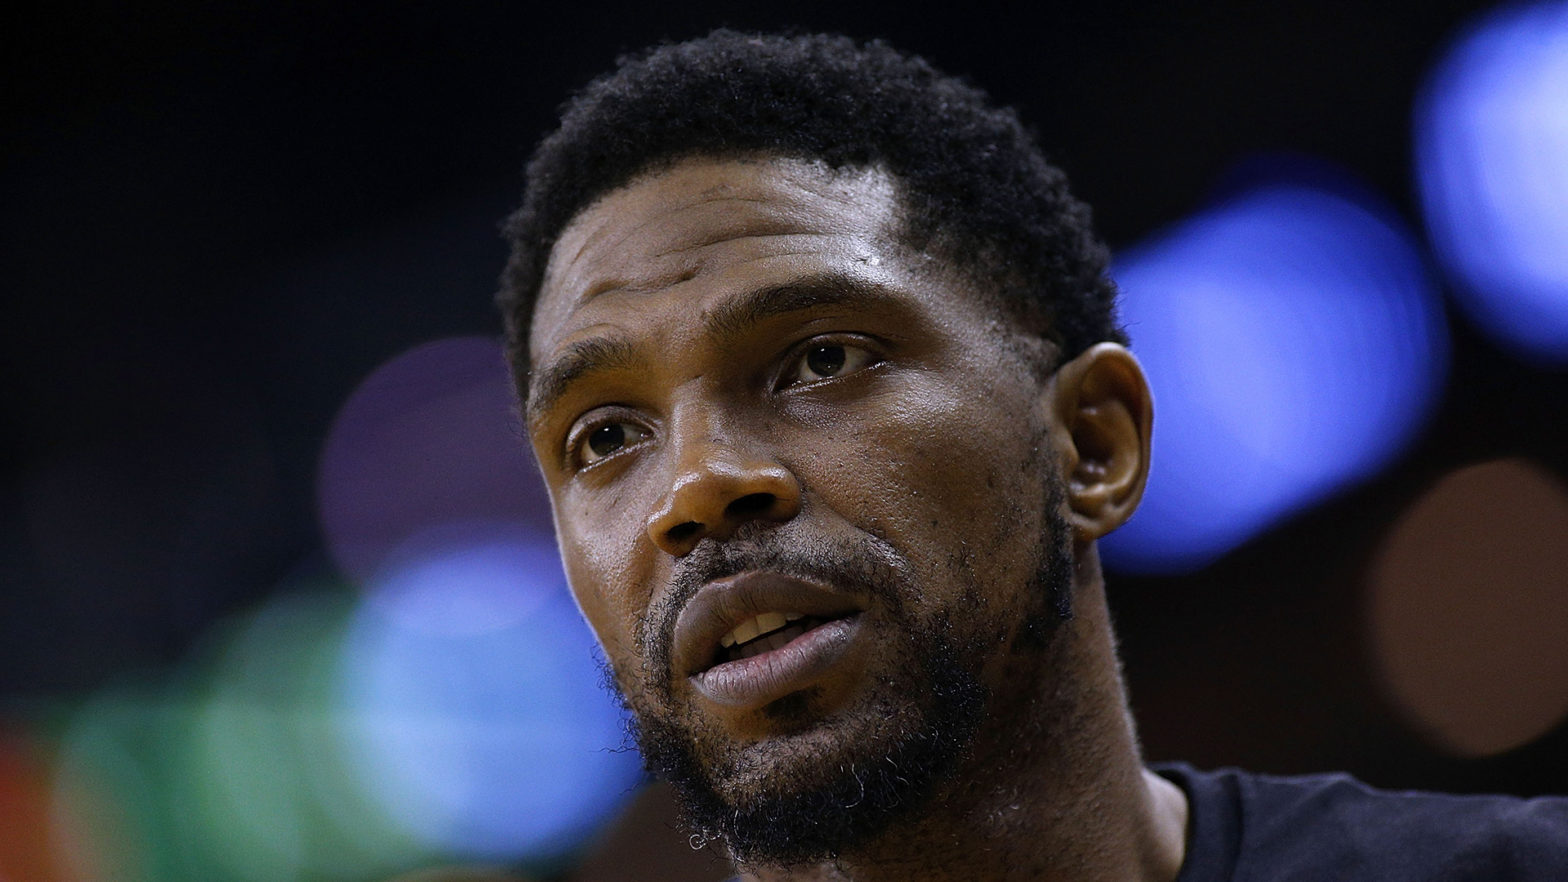 Udonis Haslem Says LeBron James, Dwyane Wade, And Chris Bosh Took Pay Cuts To Keep Him On The Team